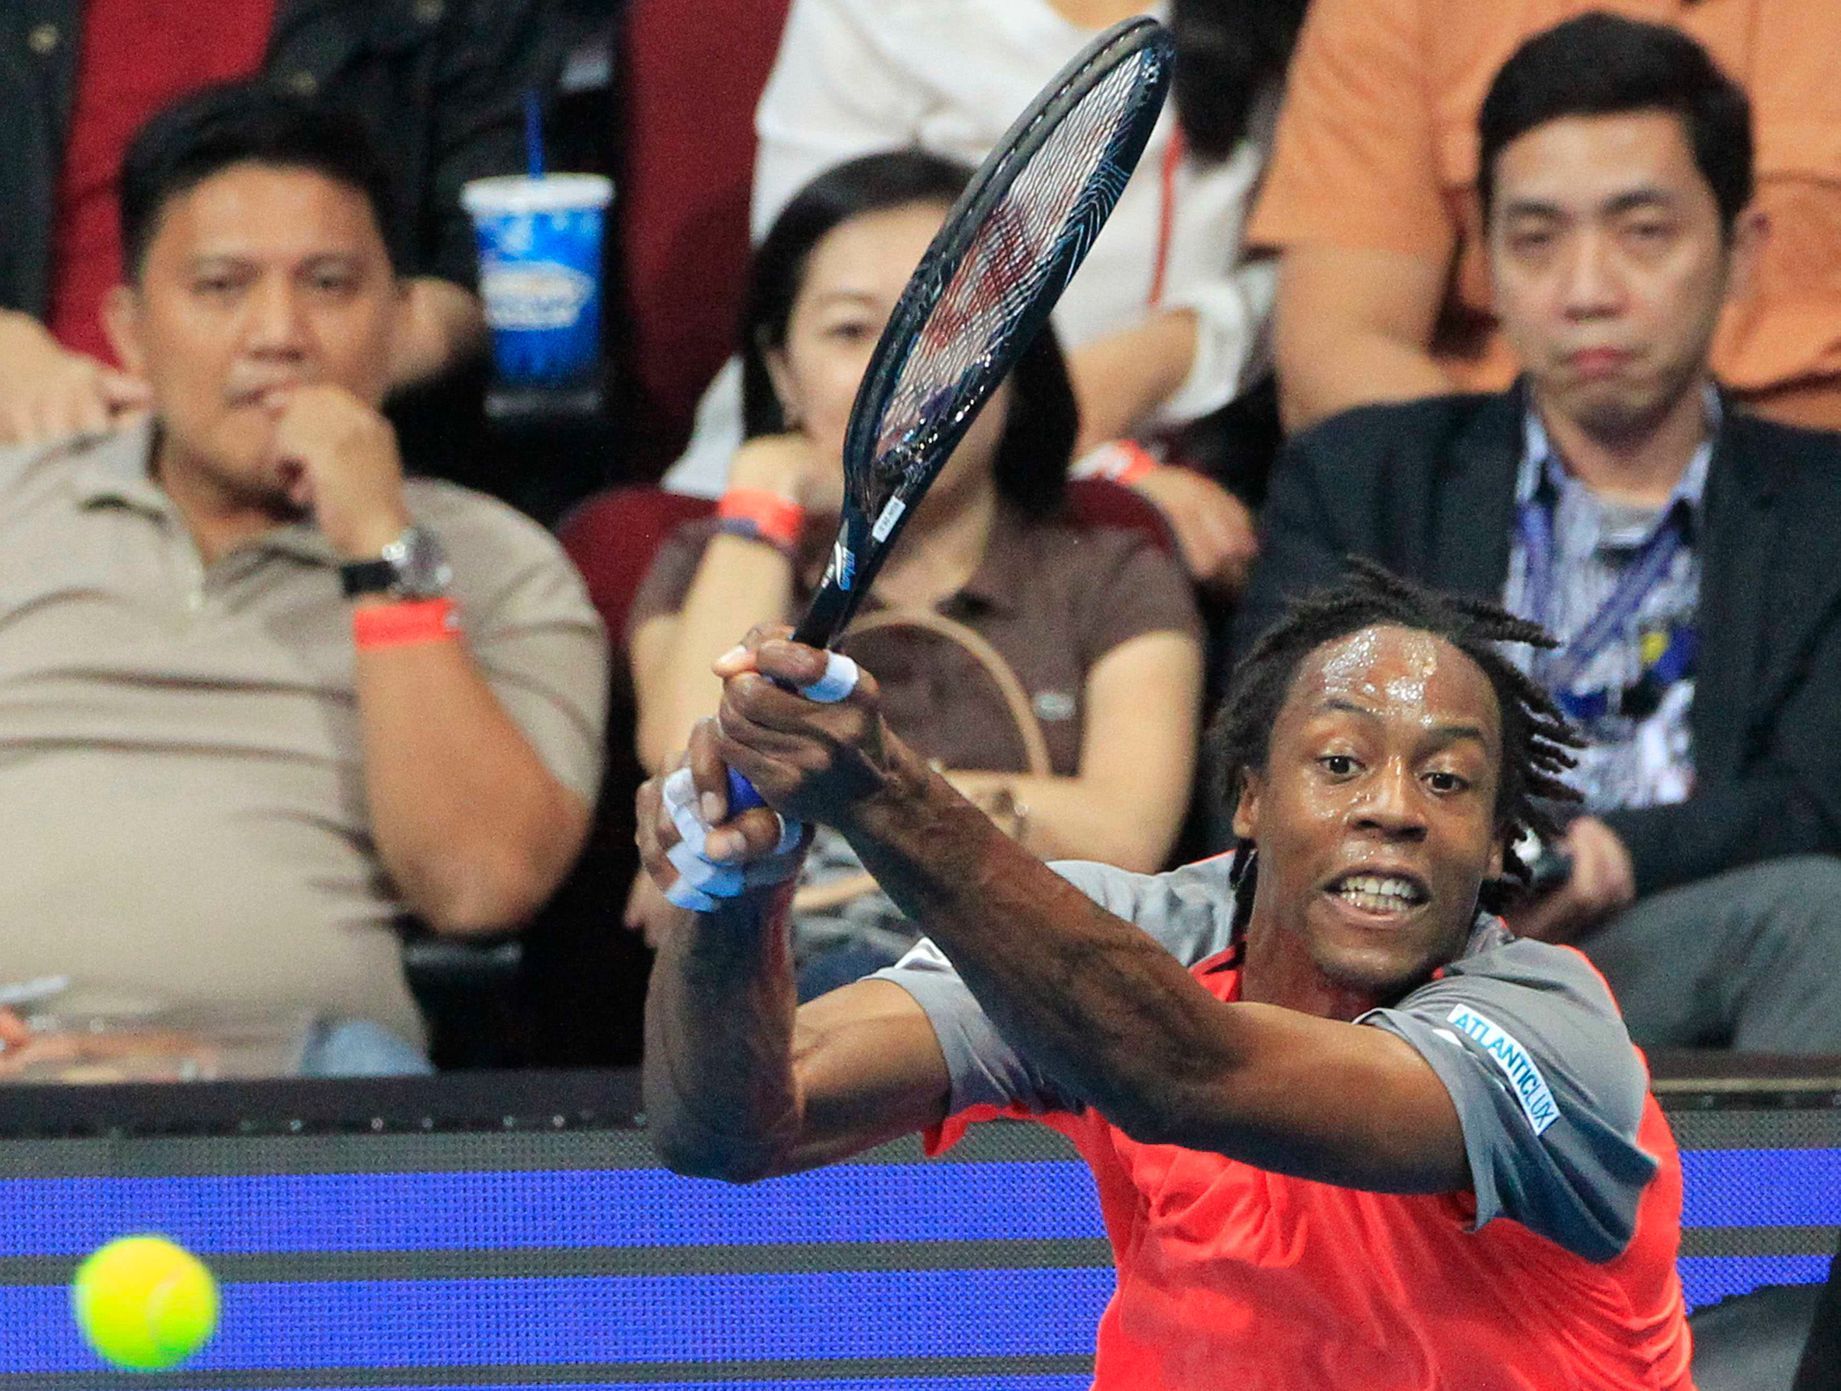 Gael Monfils of the Indian Aces returns a shot to Marin Cilic of the UAE Royals during their men's single match at the International Premier Tennis League (IPTL) in Manila